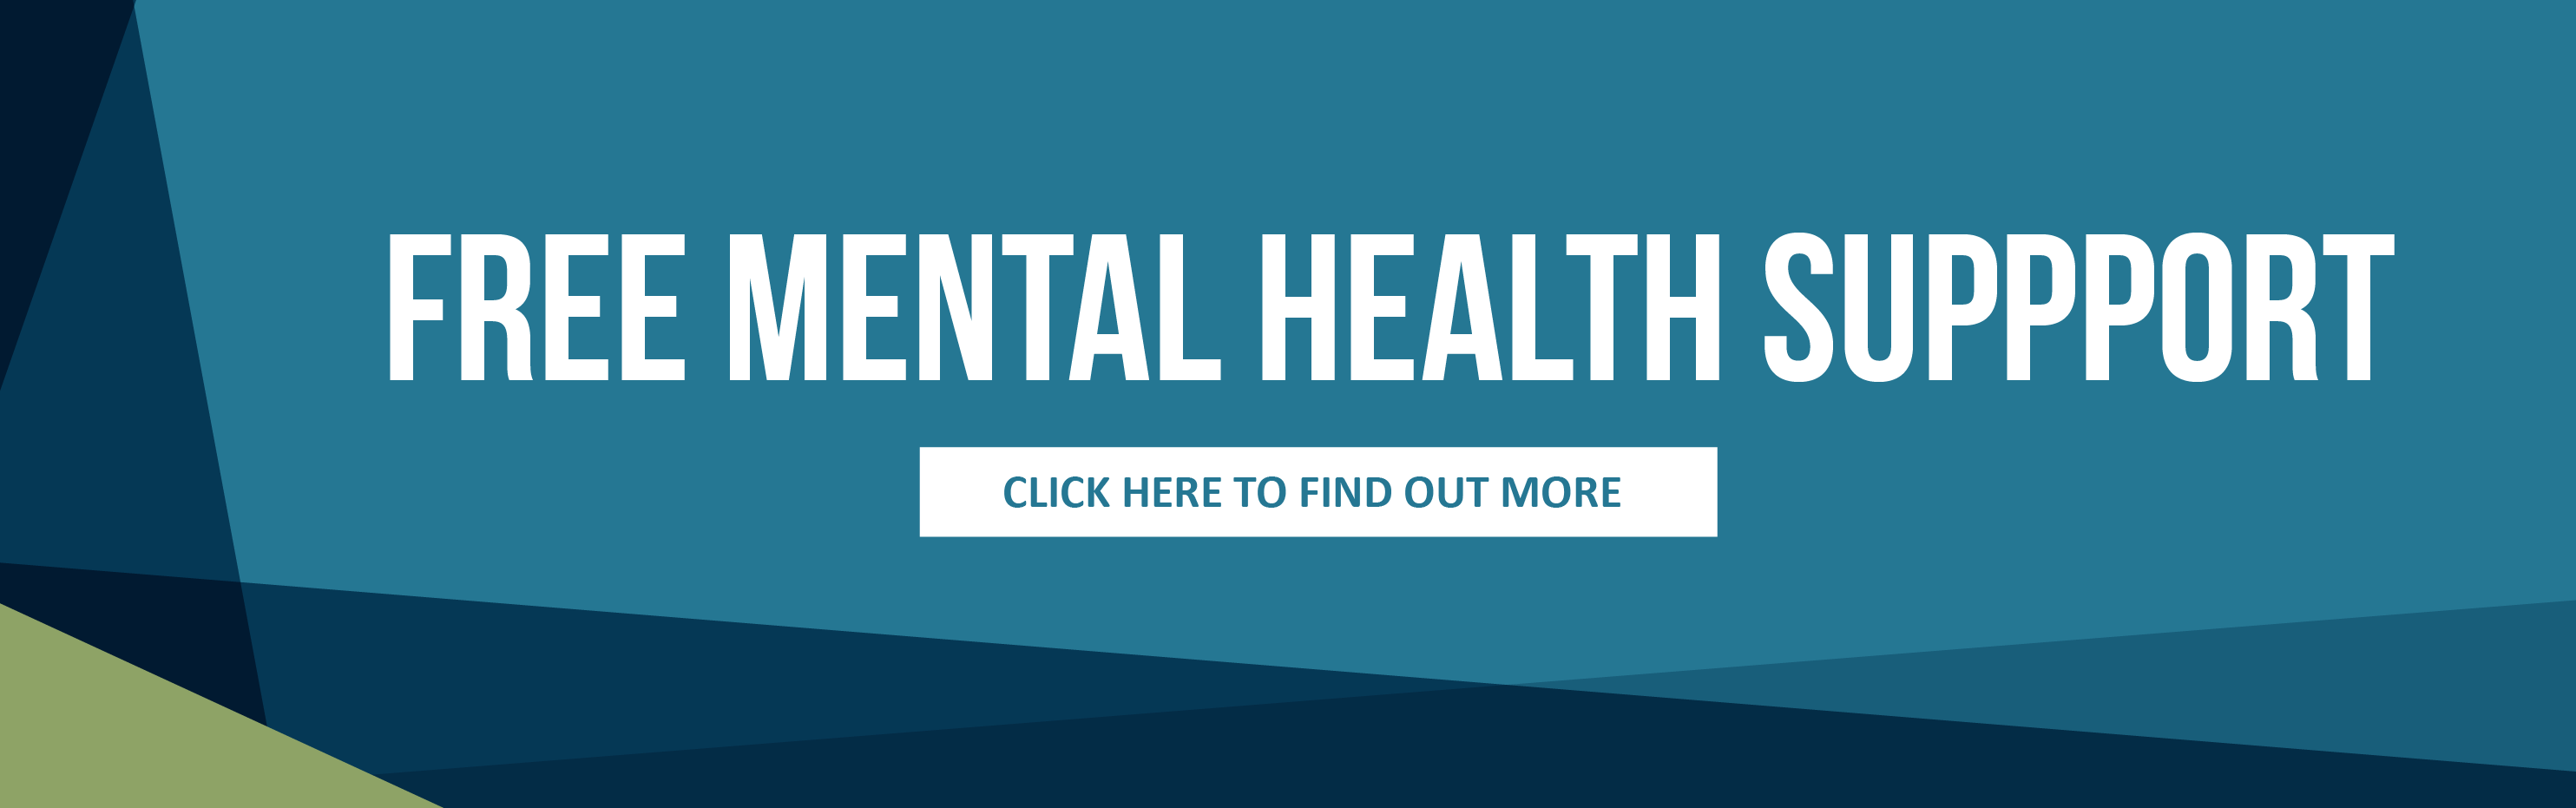 Free Mental Health Support Click Here For More Information